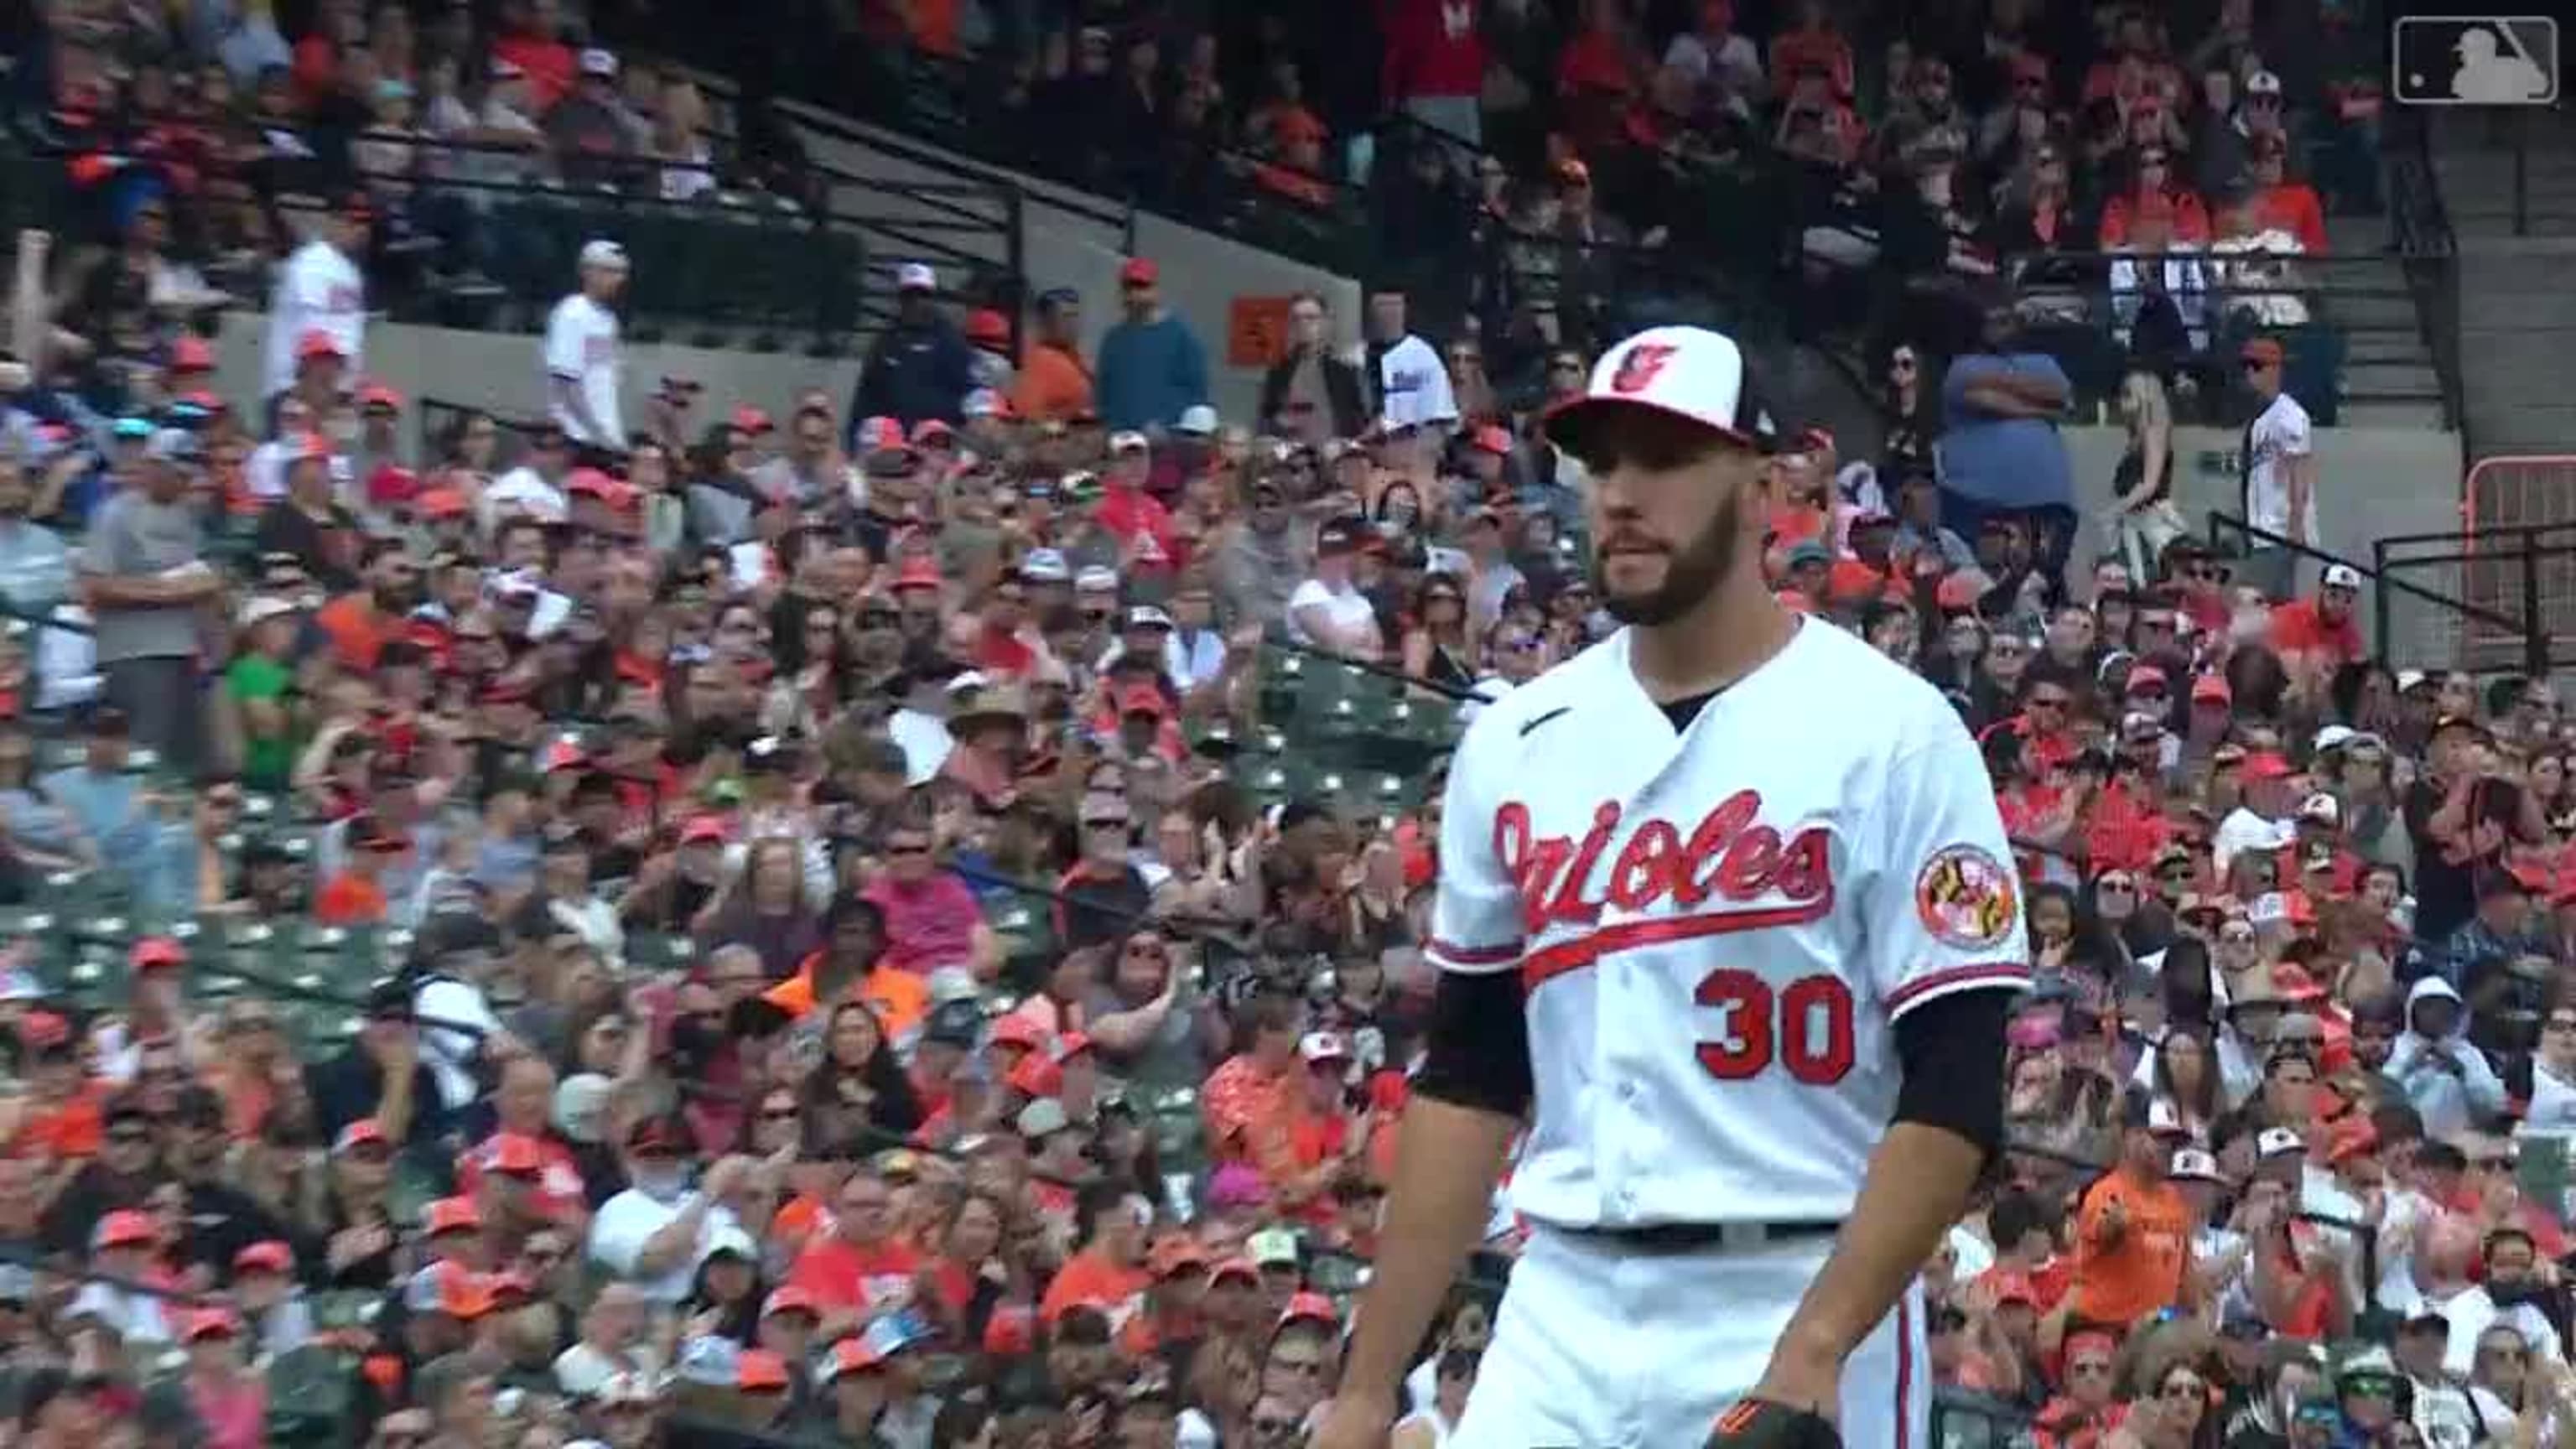 Orioles get 6th straight win, beating Tigers 2-1, on walk-off wild pitch  after duel of team's former top prospects